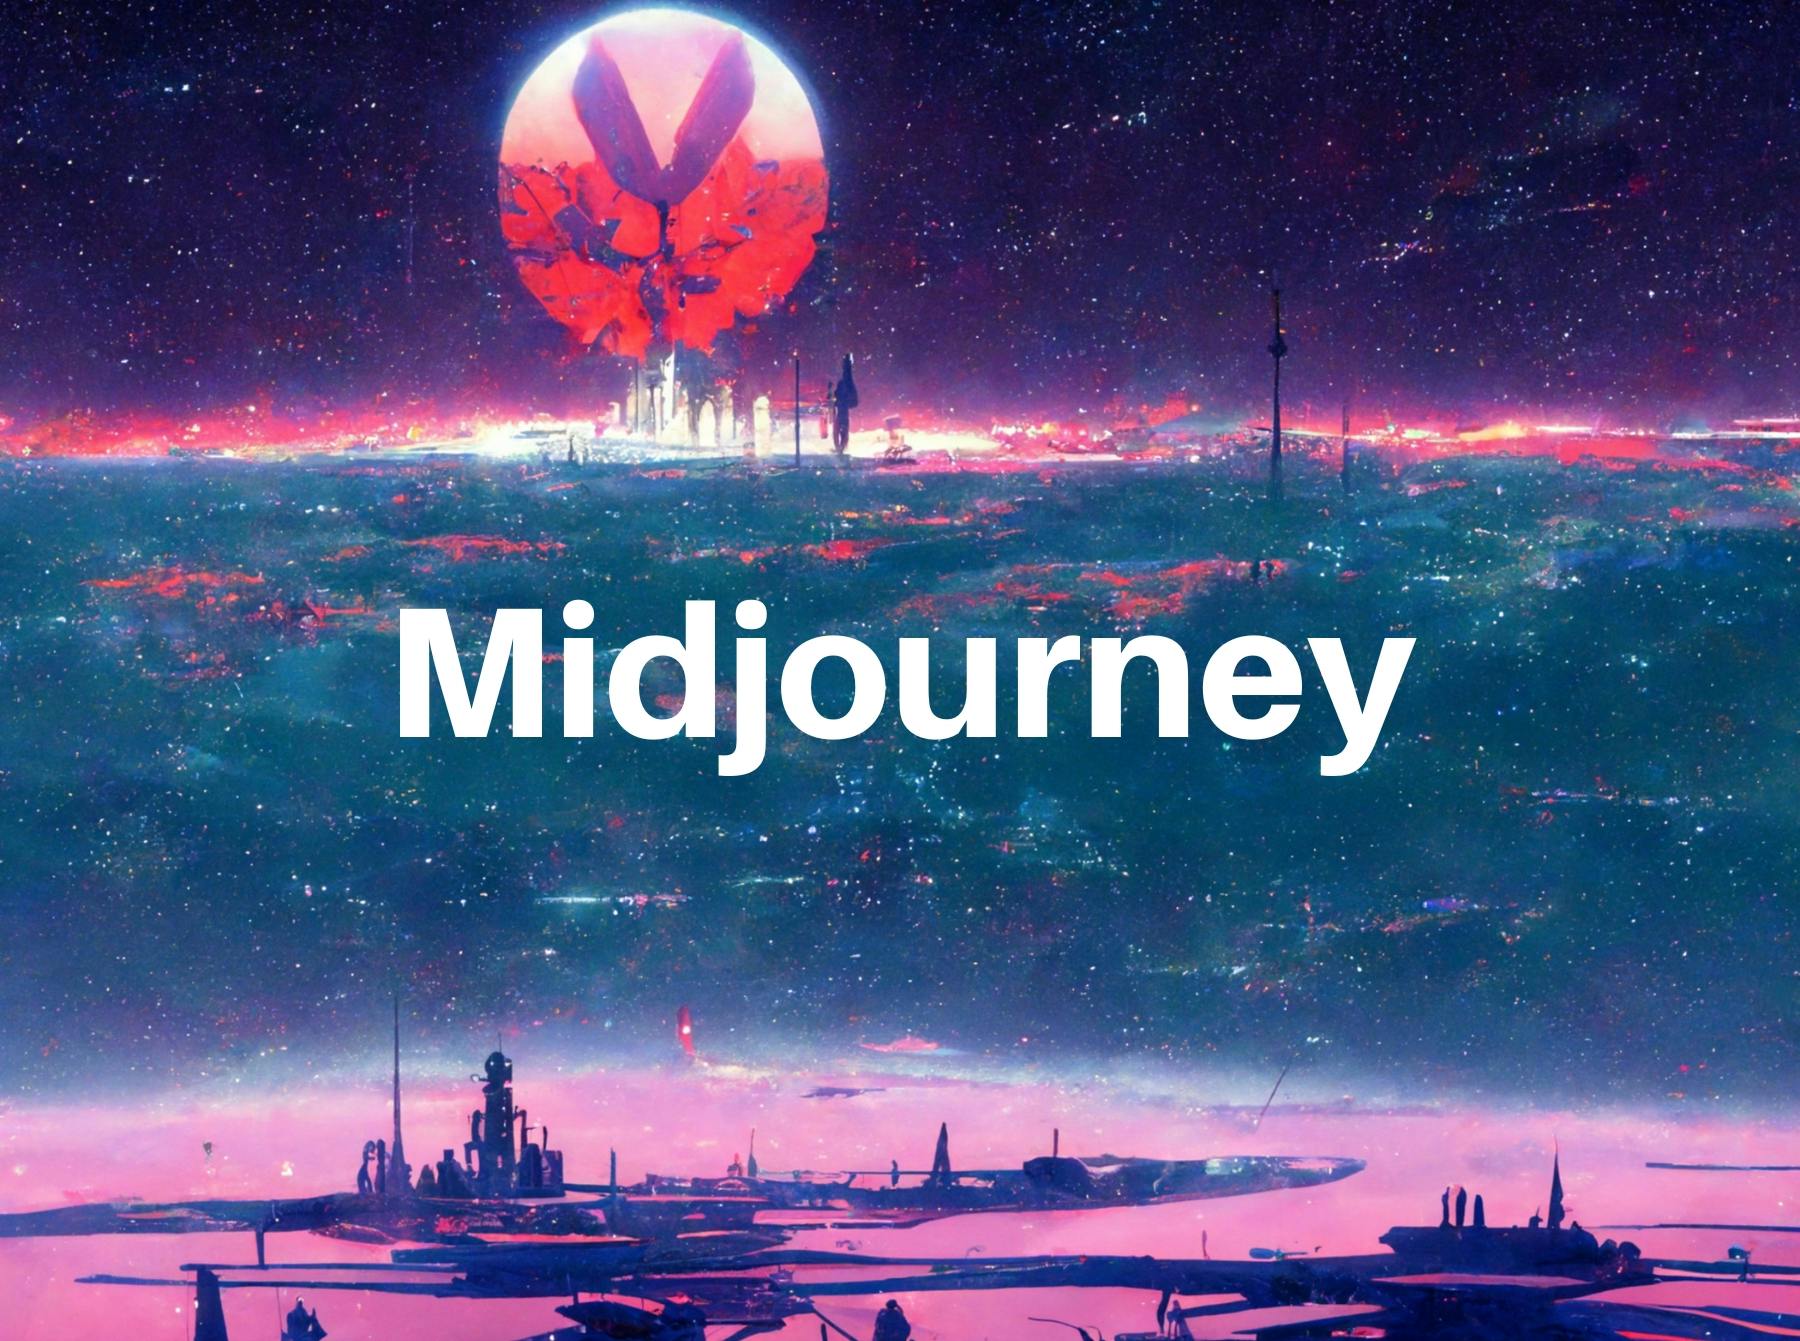 How to Use Midjourney: A Beginner's Guide guide cover image